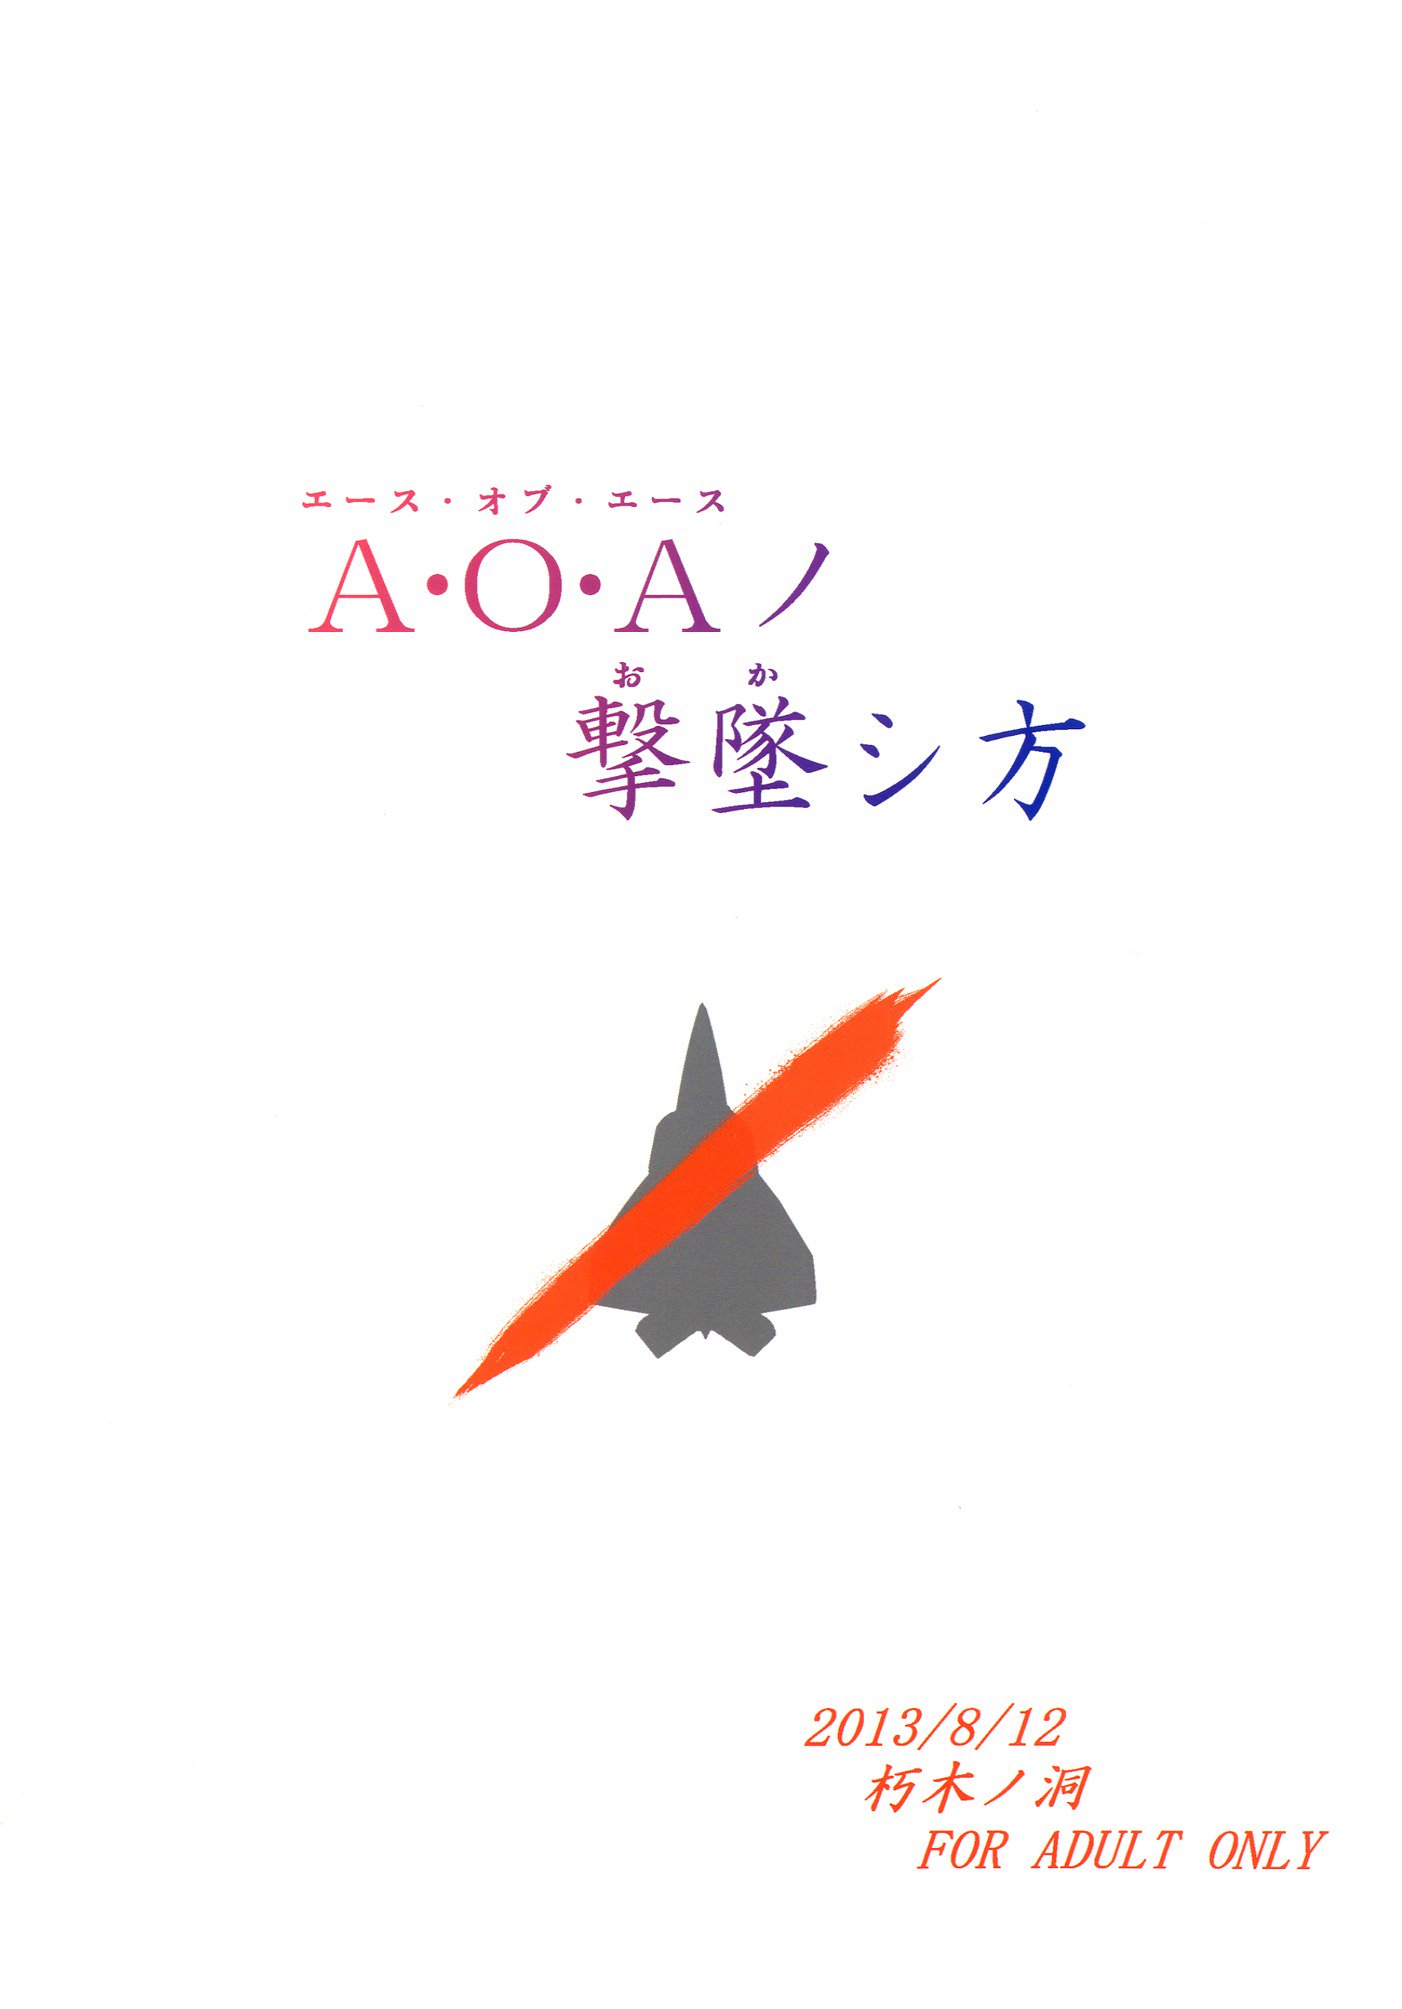 A.O.Aの岡下方